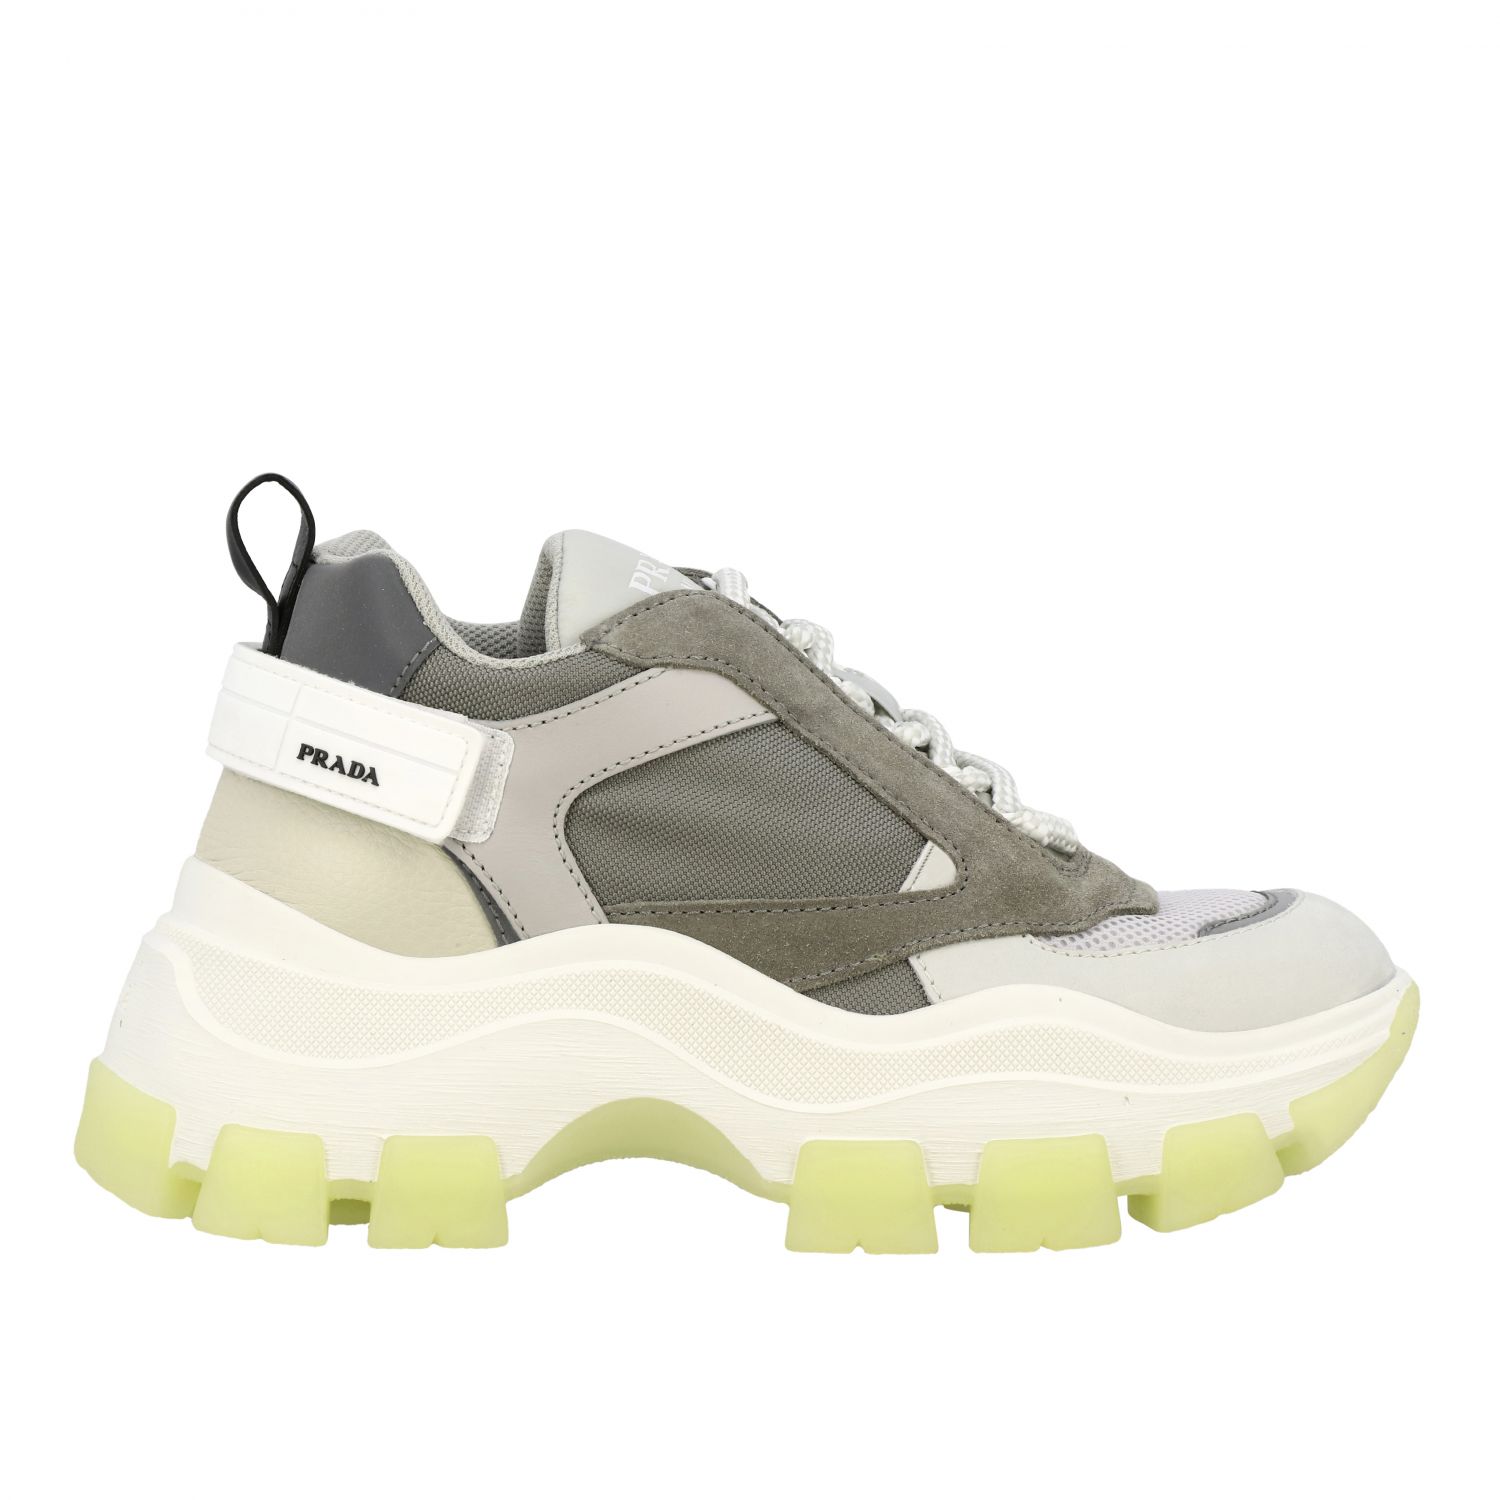 chunky Prada sneakers in suede leather 